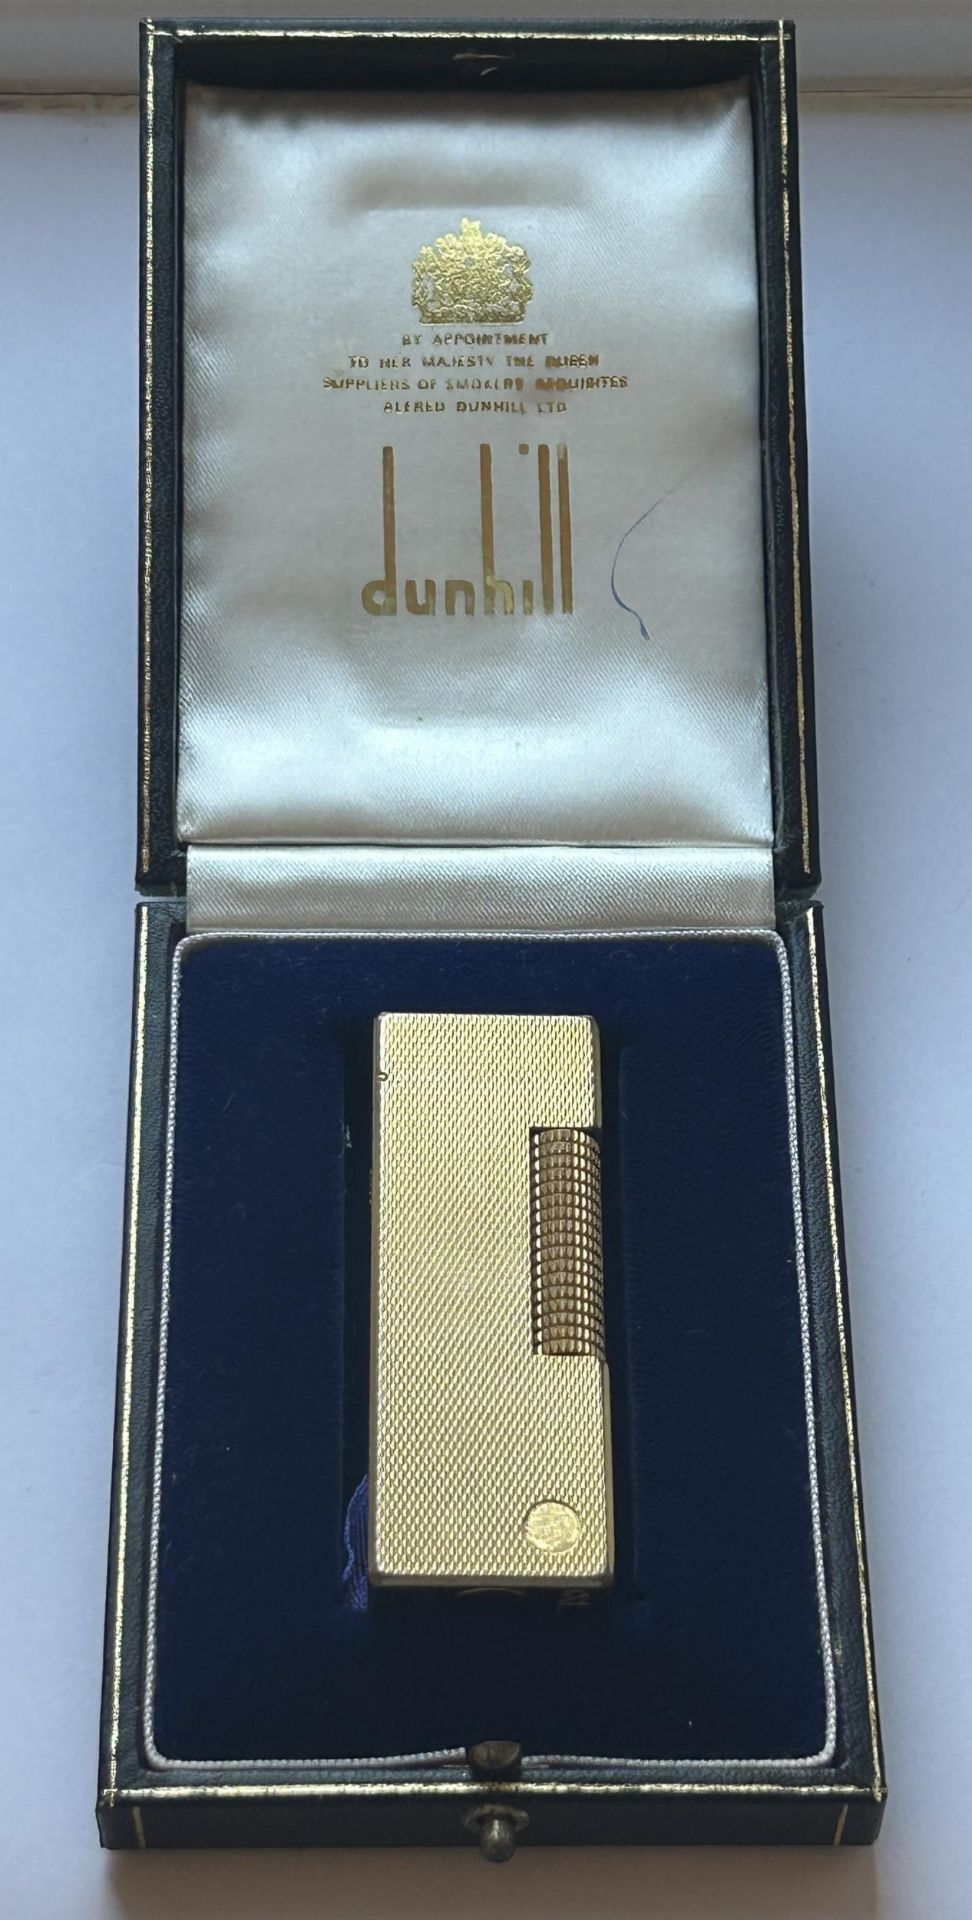 A DUNHILL GOLD PLATED POCKET LIGHTER COMPLETE WITH ORIGINAL FITTED DUNHILL CASE